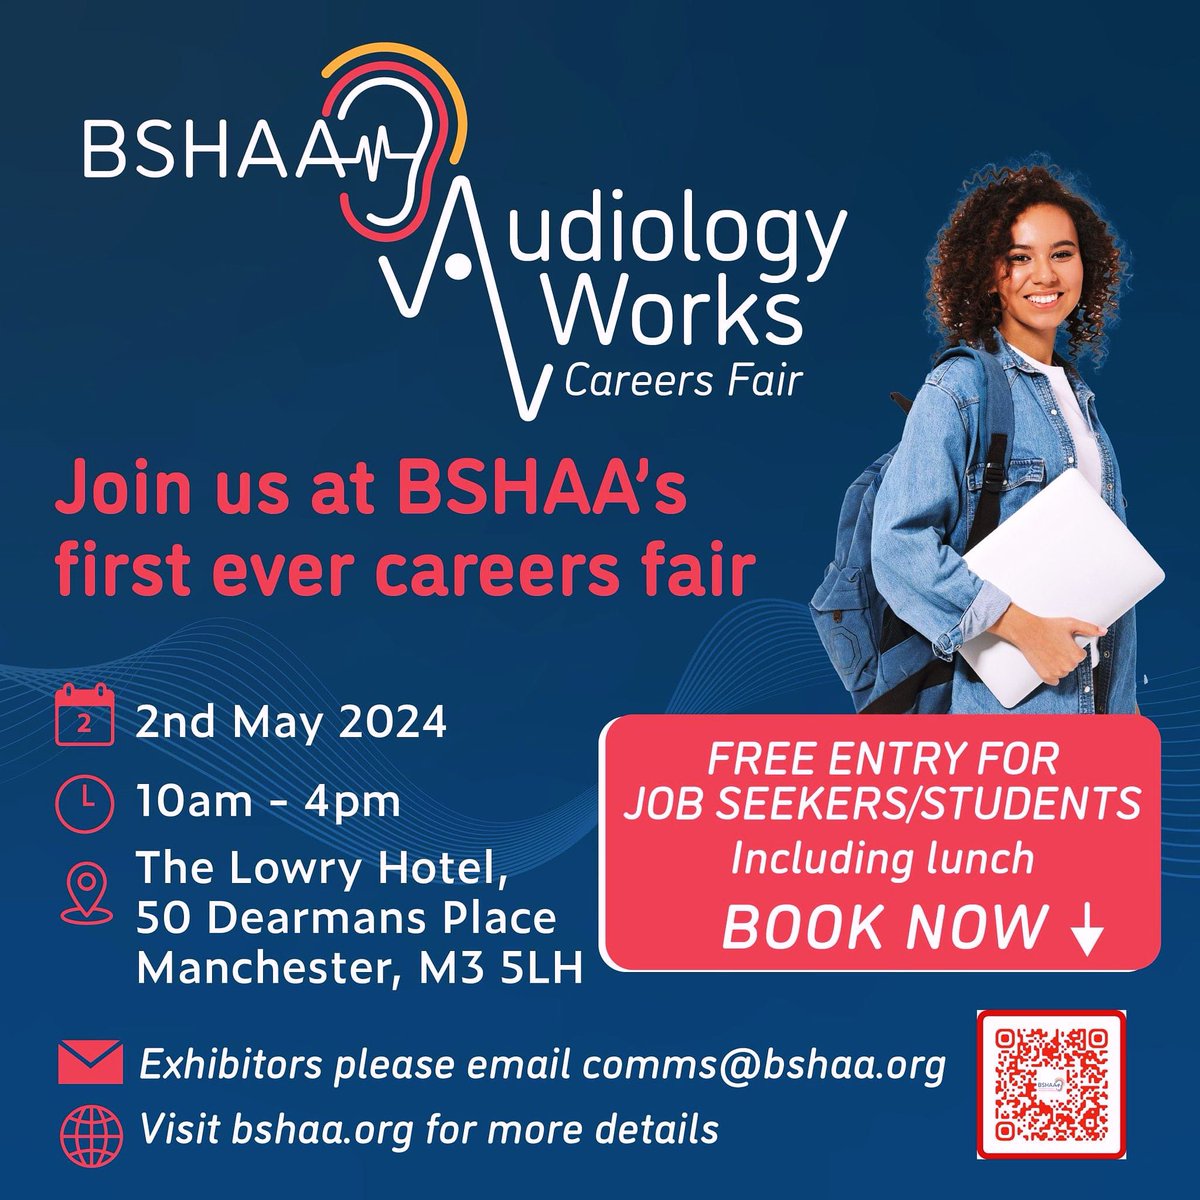 BOOK NOW - 4 DAYS TO GO! Free for students and jobseekers. bit.ly/AudiologyWorks…